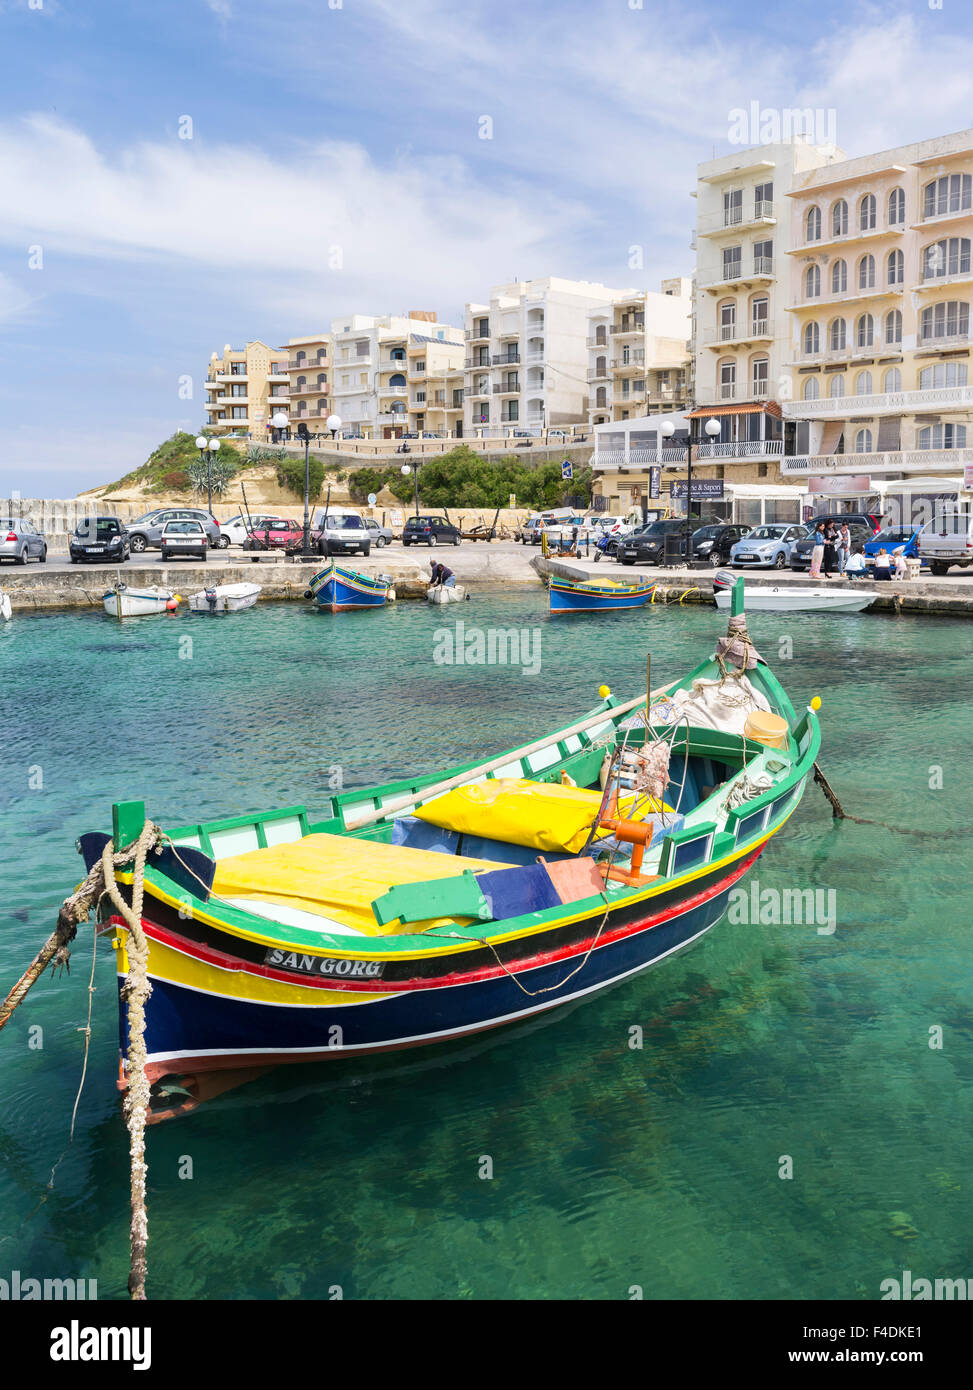 The island of Gozo in the Maltese archipelago. The former fishing village Marsalforn with modern hotel buildings and traditional fishing boats called Luzzu in the harbor. Europe, Southern Europe, Malta. (Large format sizes available) Stock Photo